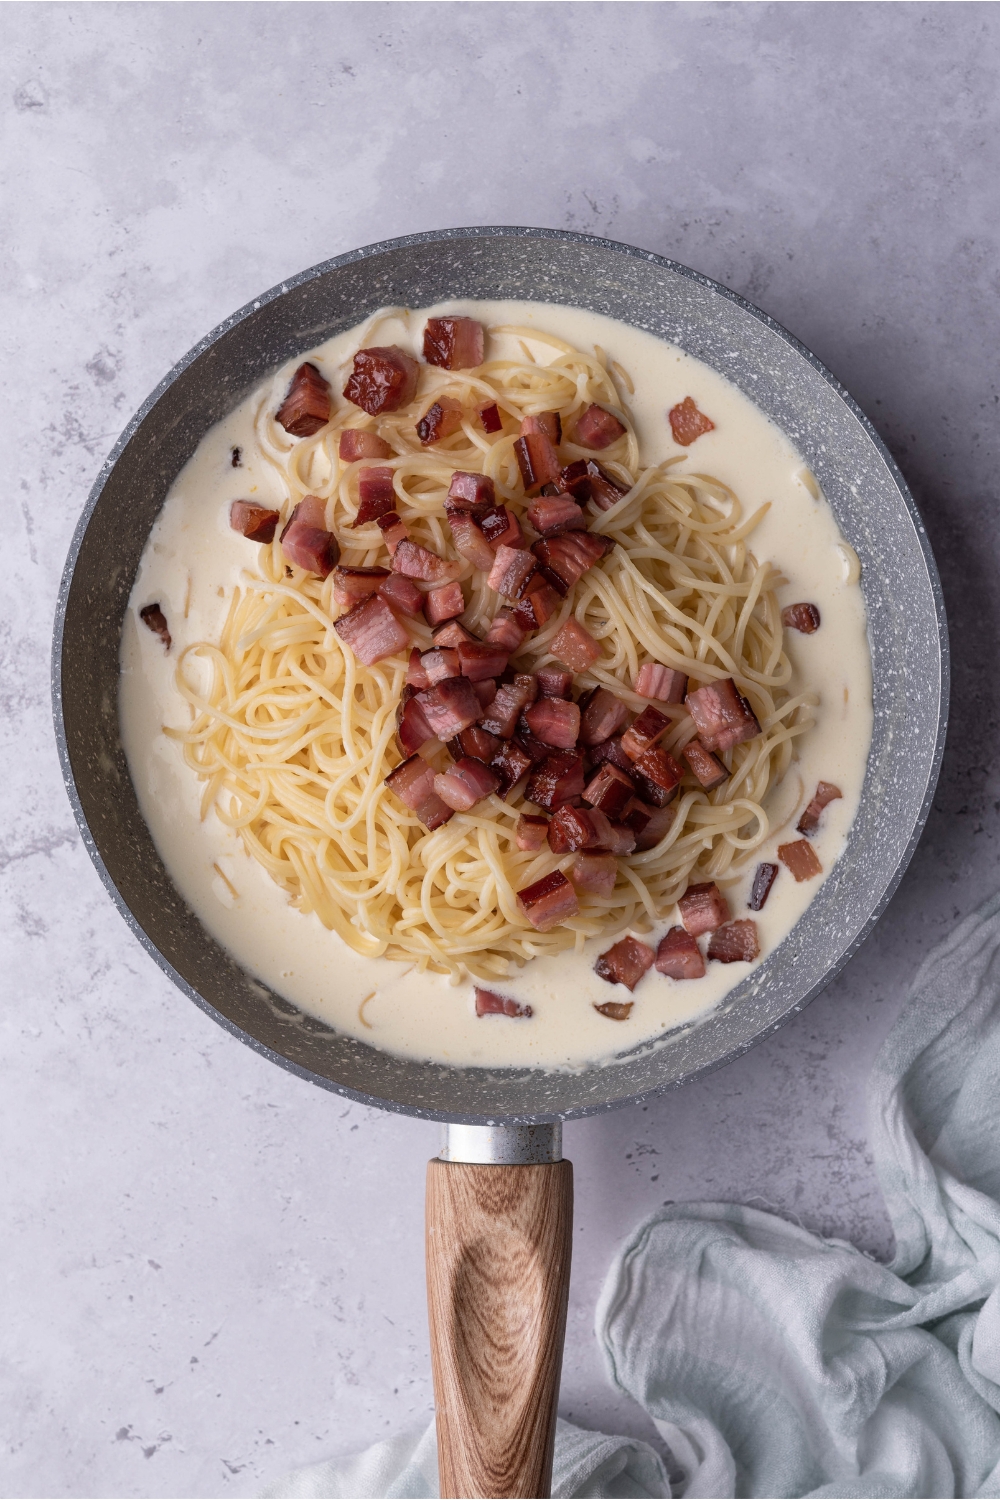 Pancetta on top of spaghetti noodles in a cream sauce in a pan.